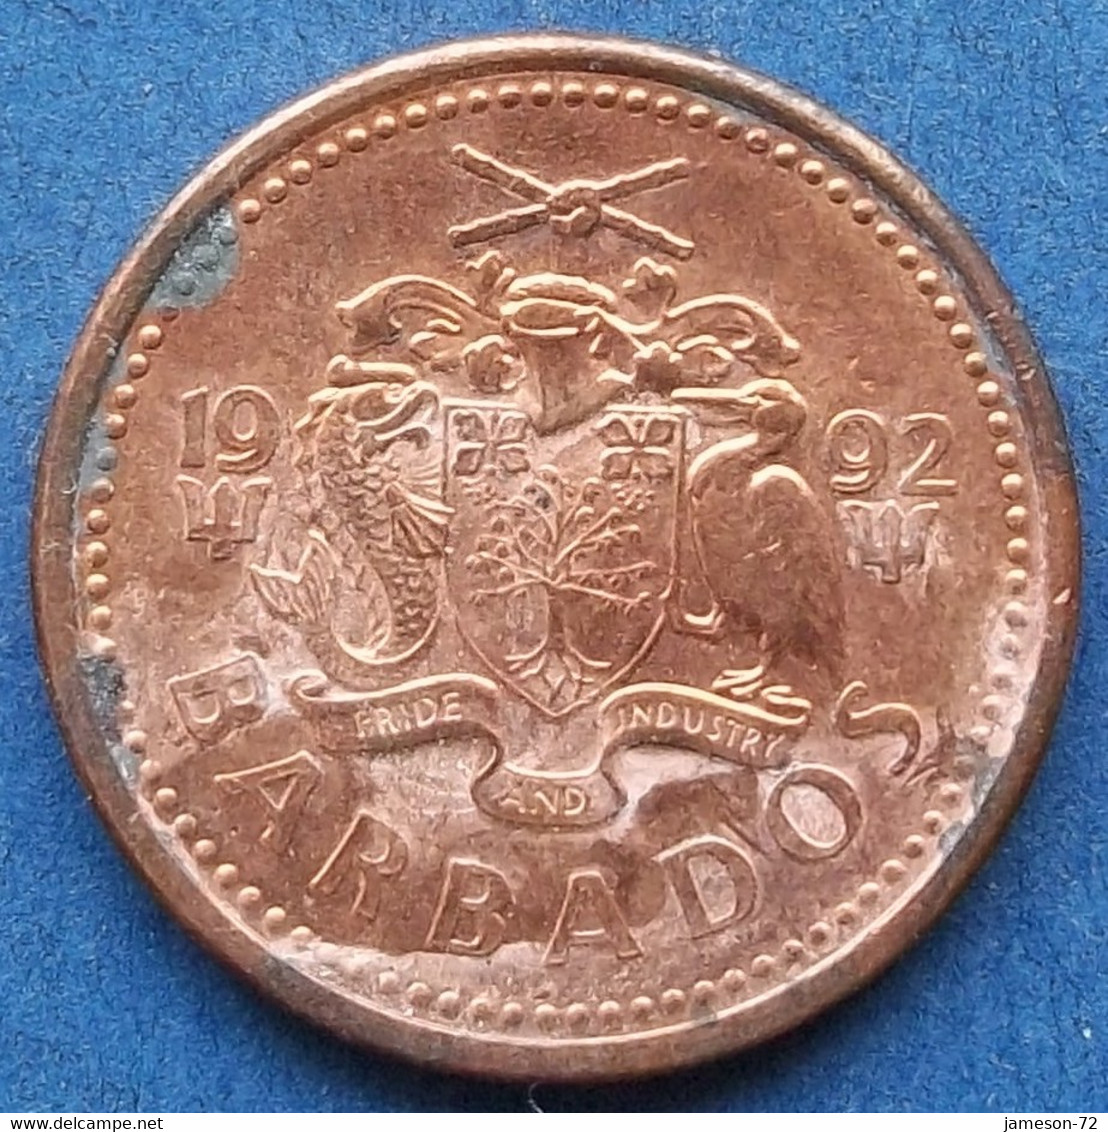 BARBADOS - 1 Cent 1992 "trident" KM# 10a Member Of The Commonwealth, Independent Republic (1966) - Edelweiss Coins - Barbados (Barbuda)